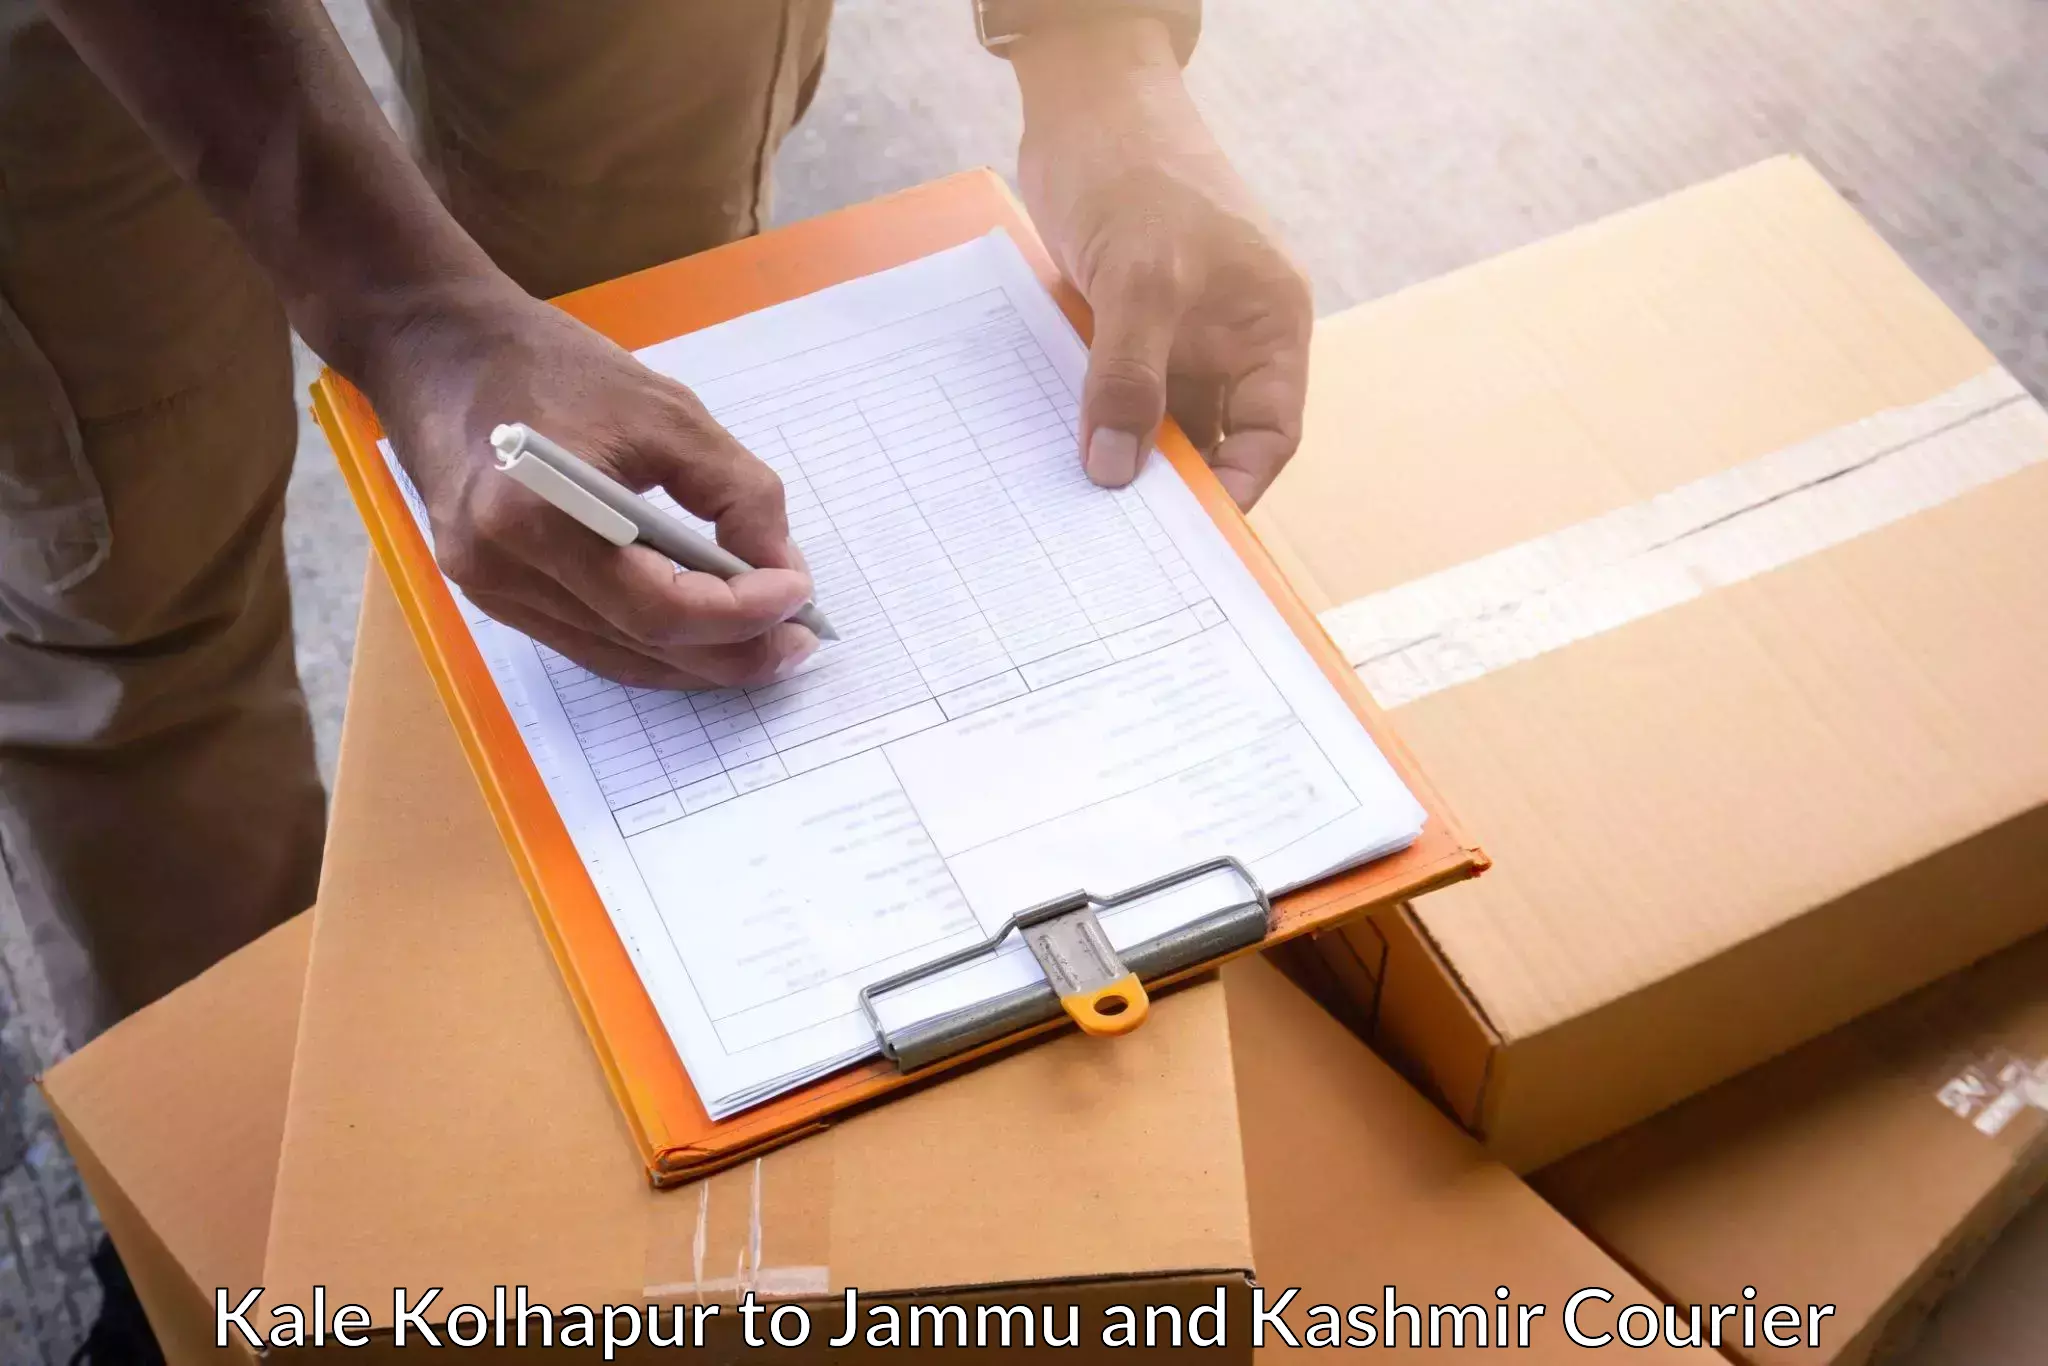 Courier service booking in Kale Kolhapur to Katra